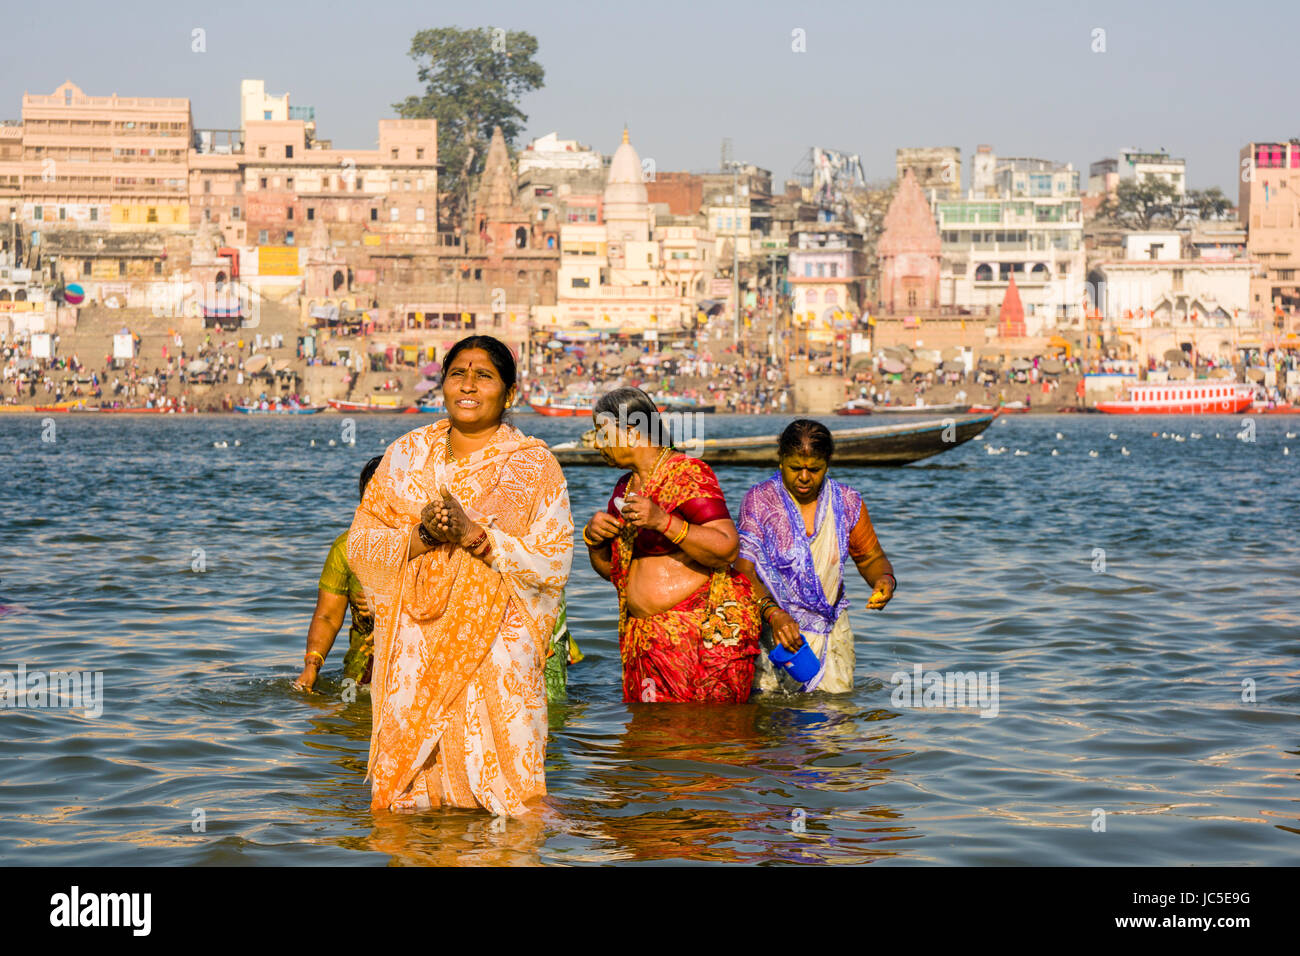 Pilgrims are taking bath and pray on the sand banks at the holy river Ganges, panorama of Dashashwamedh Ghat, Main Ghat, in the distance Stock Photo